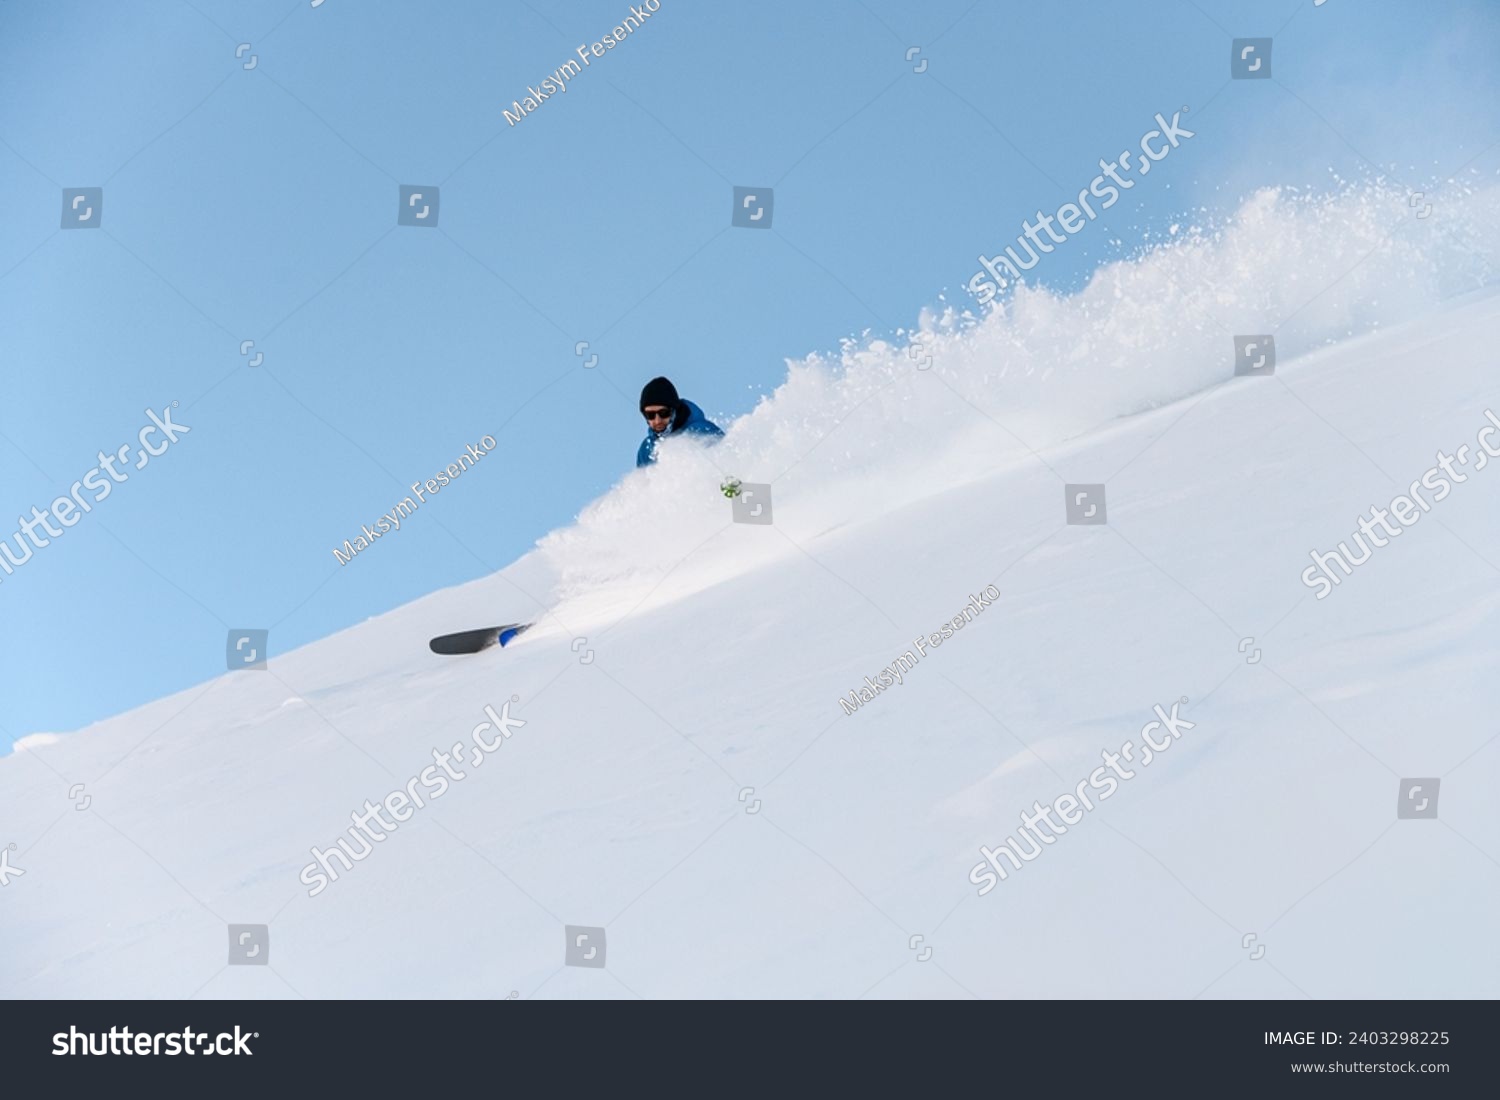 Male skier in a blue jacket goes down a snowy slope, so that he is almost invisible behind the powder snow #2403298225